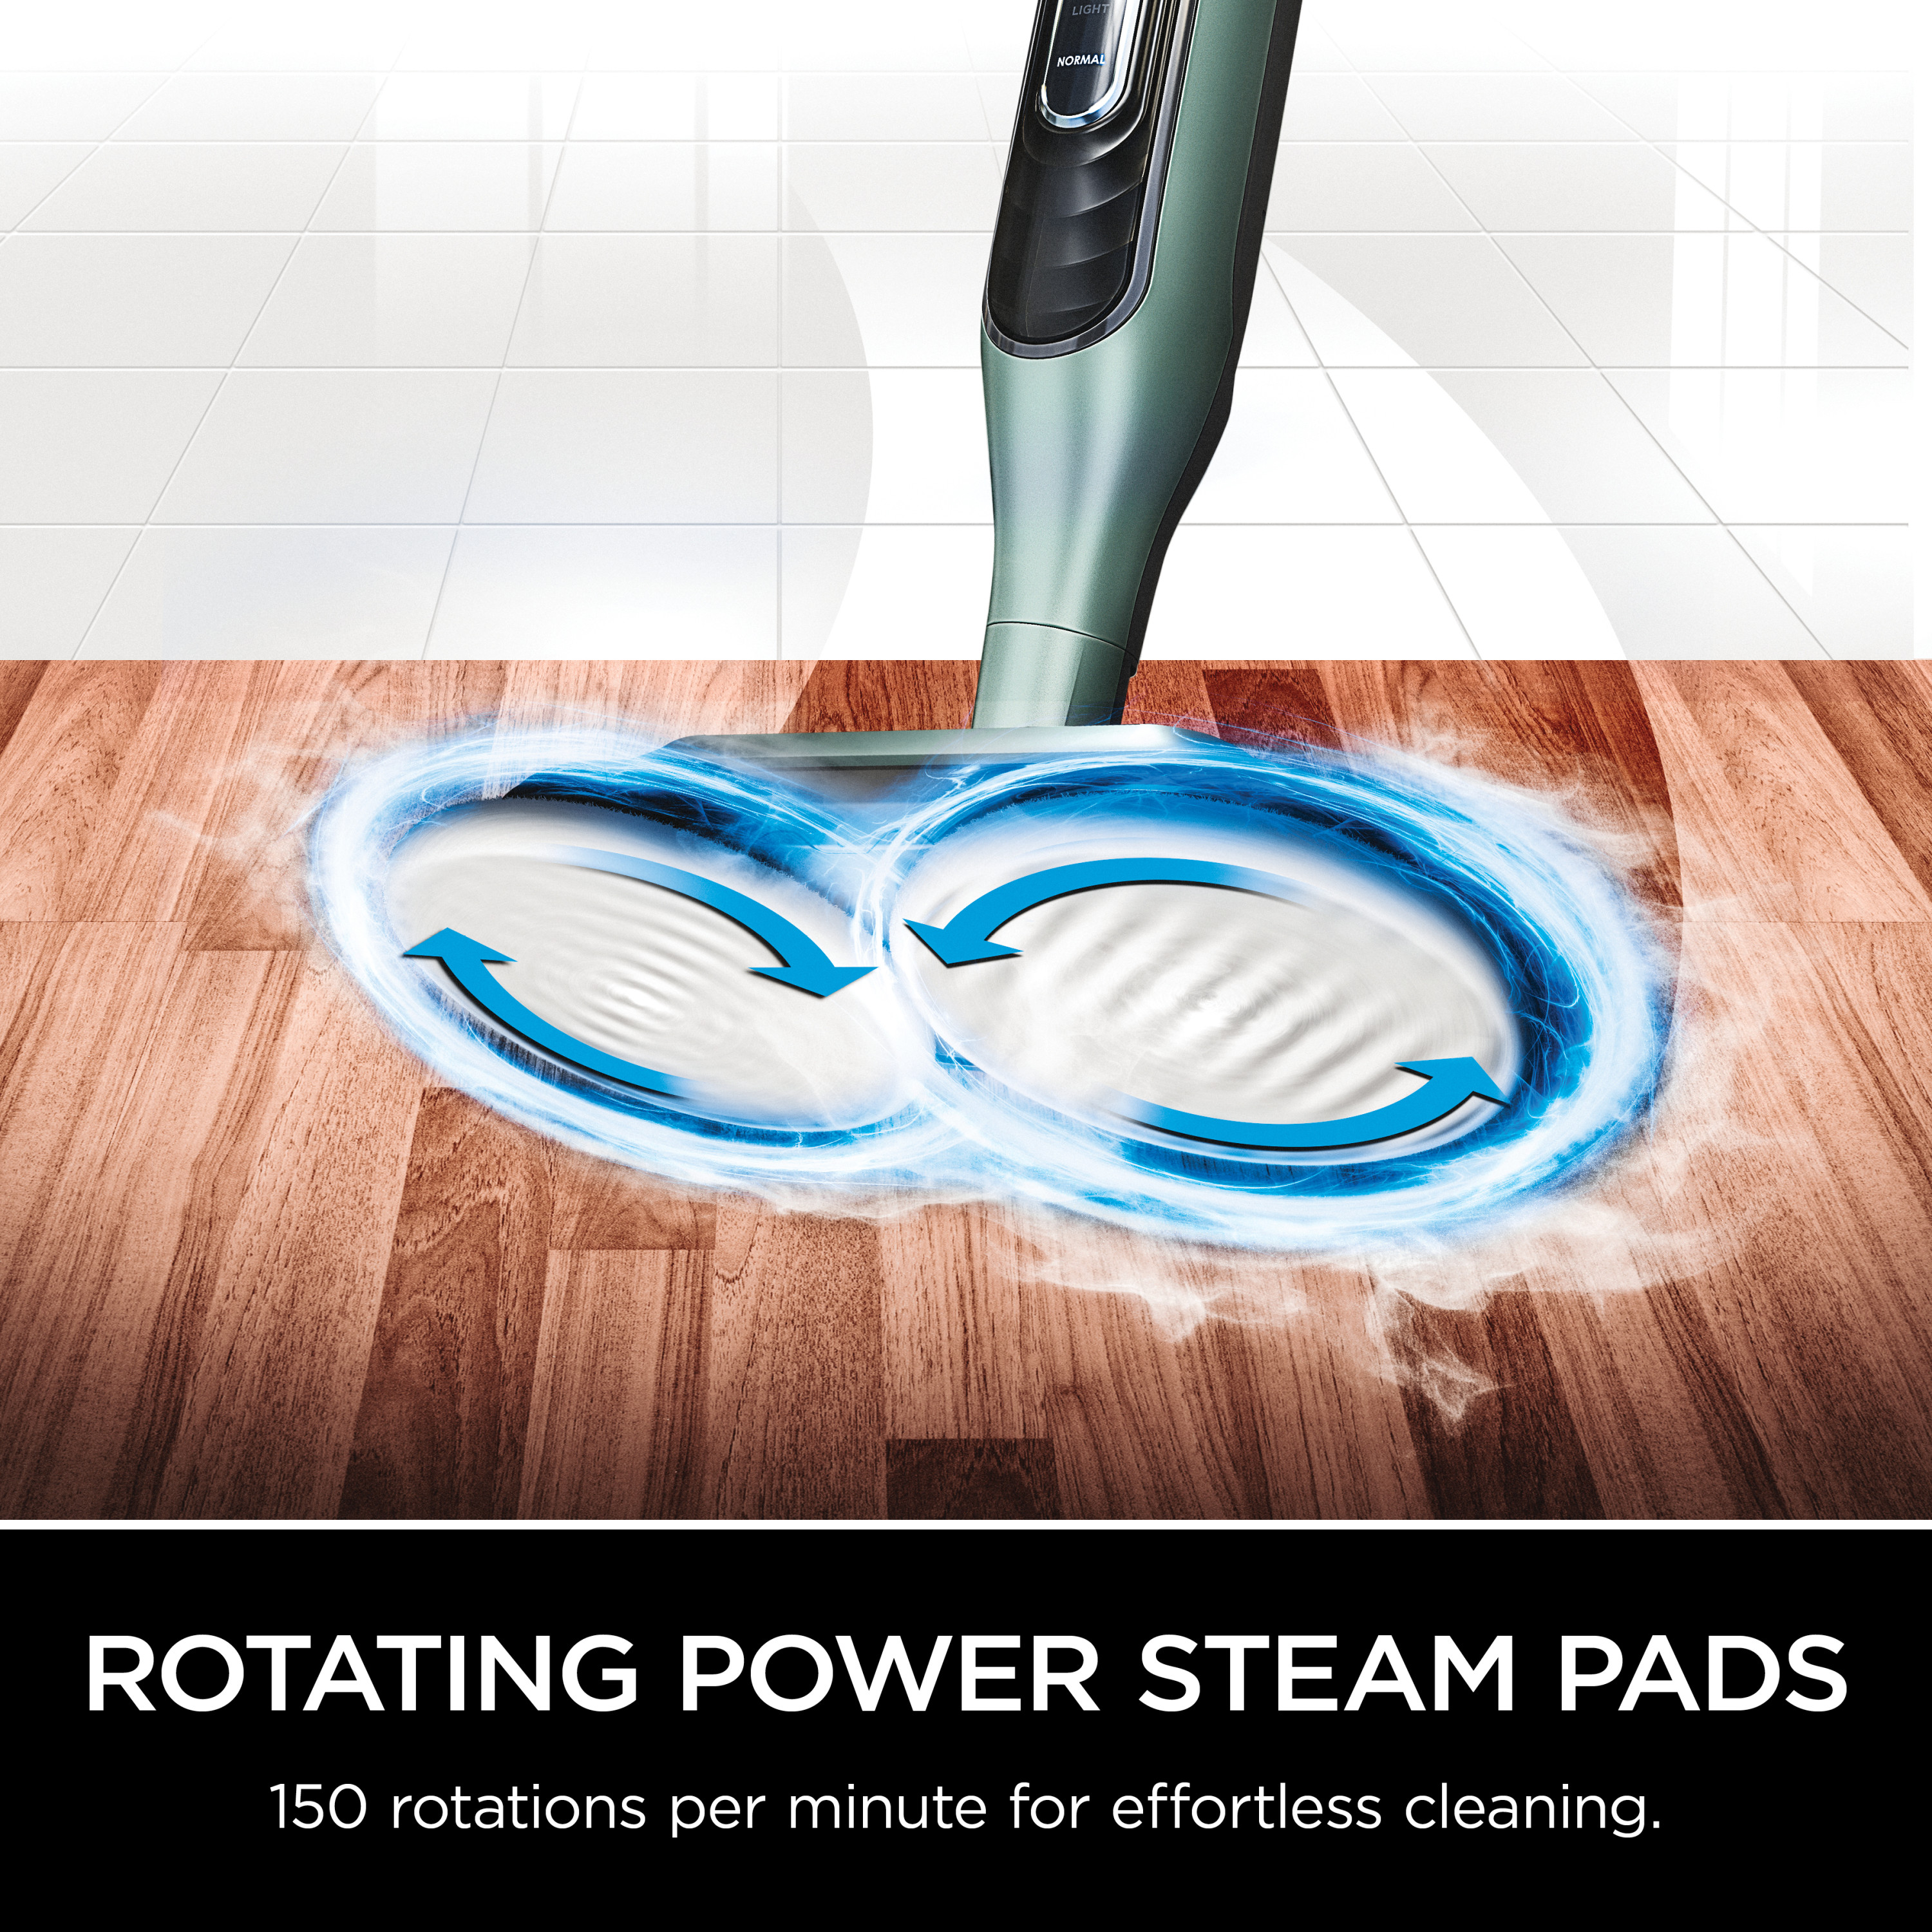 Shark® Steam & Scrub All-in-One Scrubbing and Sanitizing Hard Floor Steam Mop S7000 - image 3 of 14